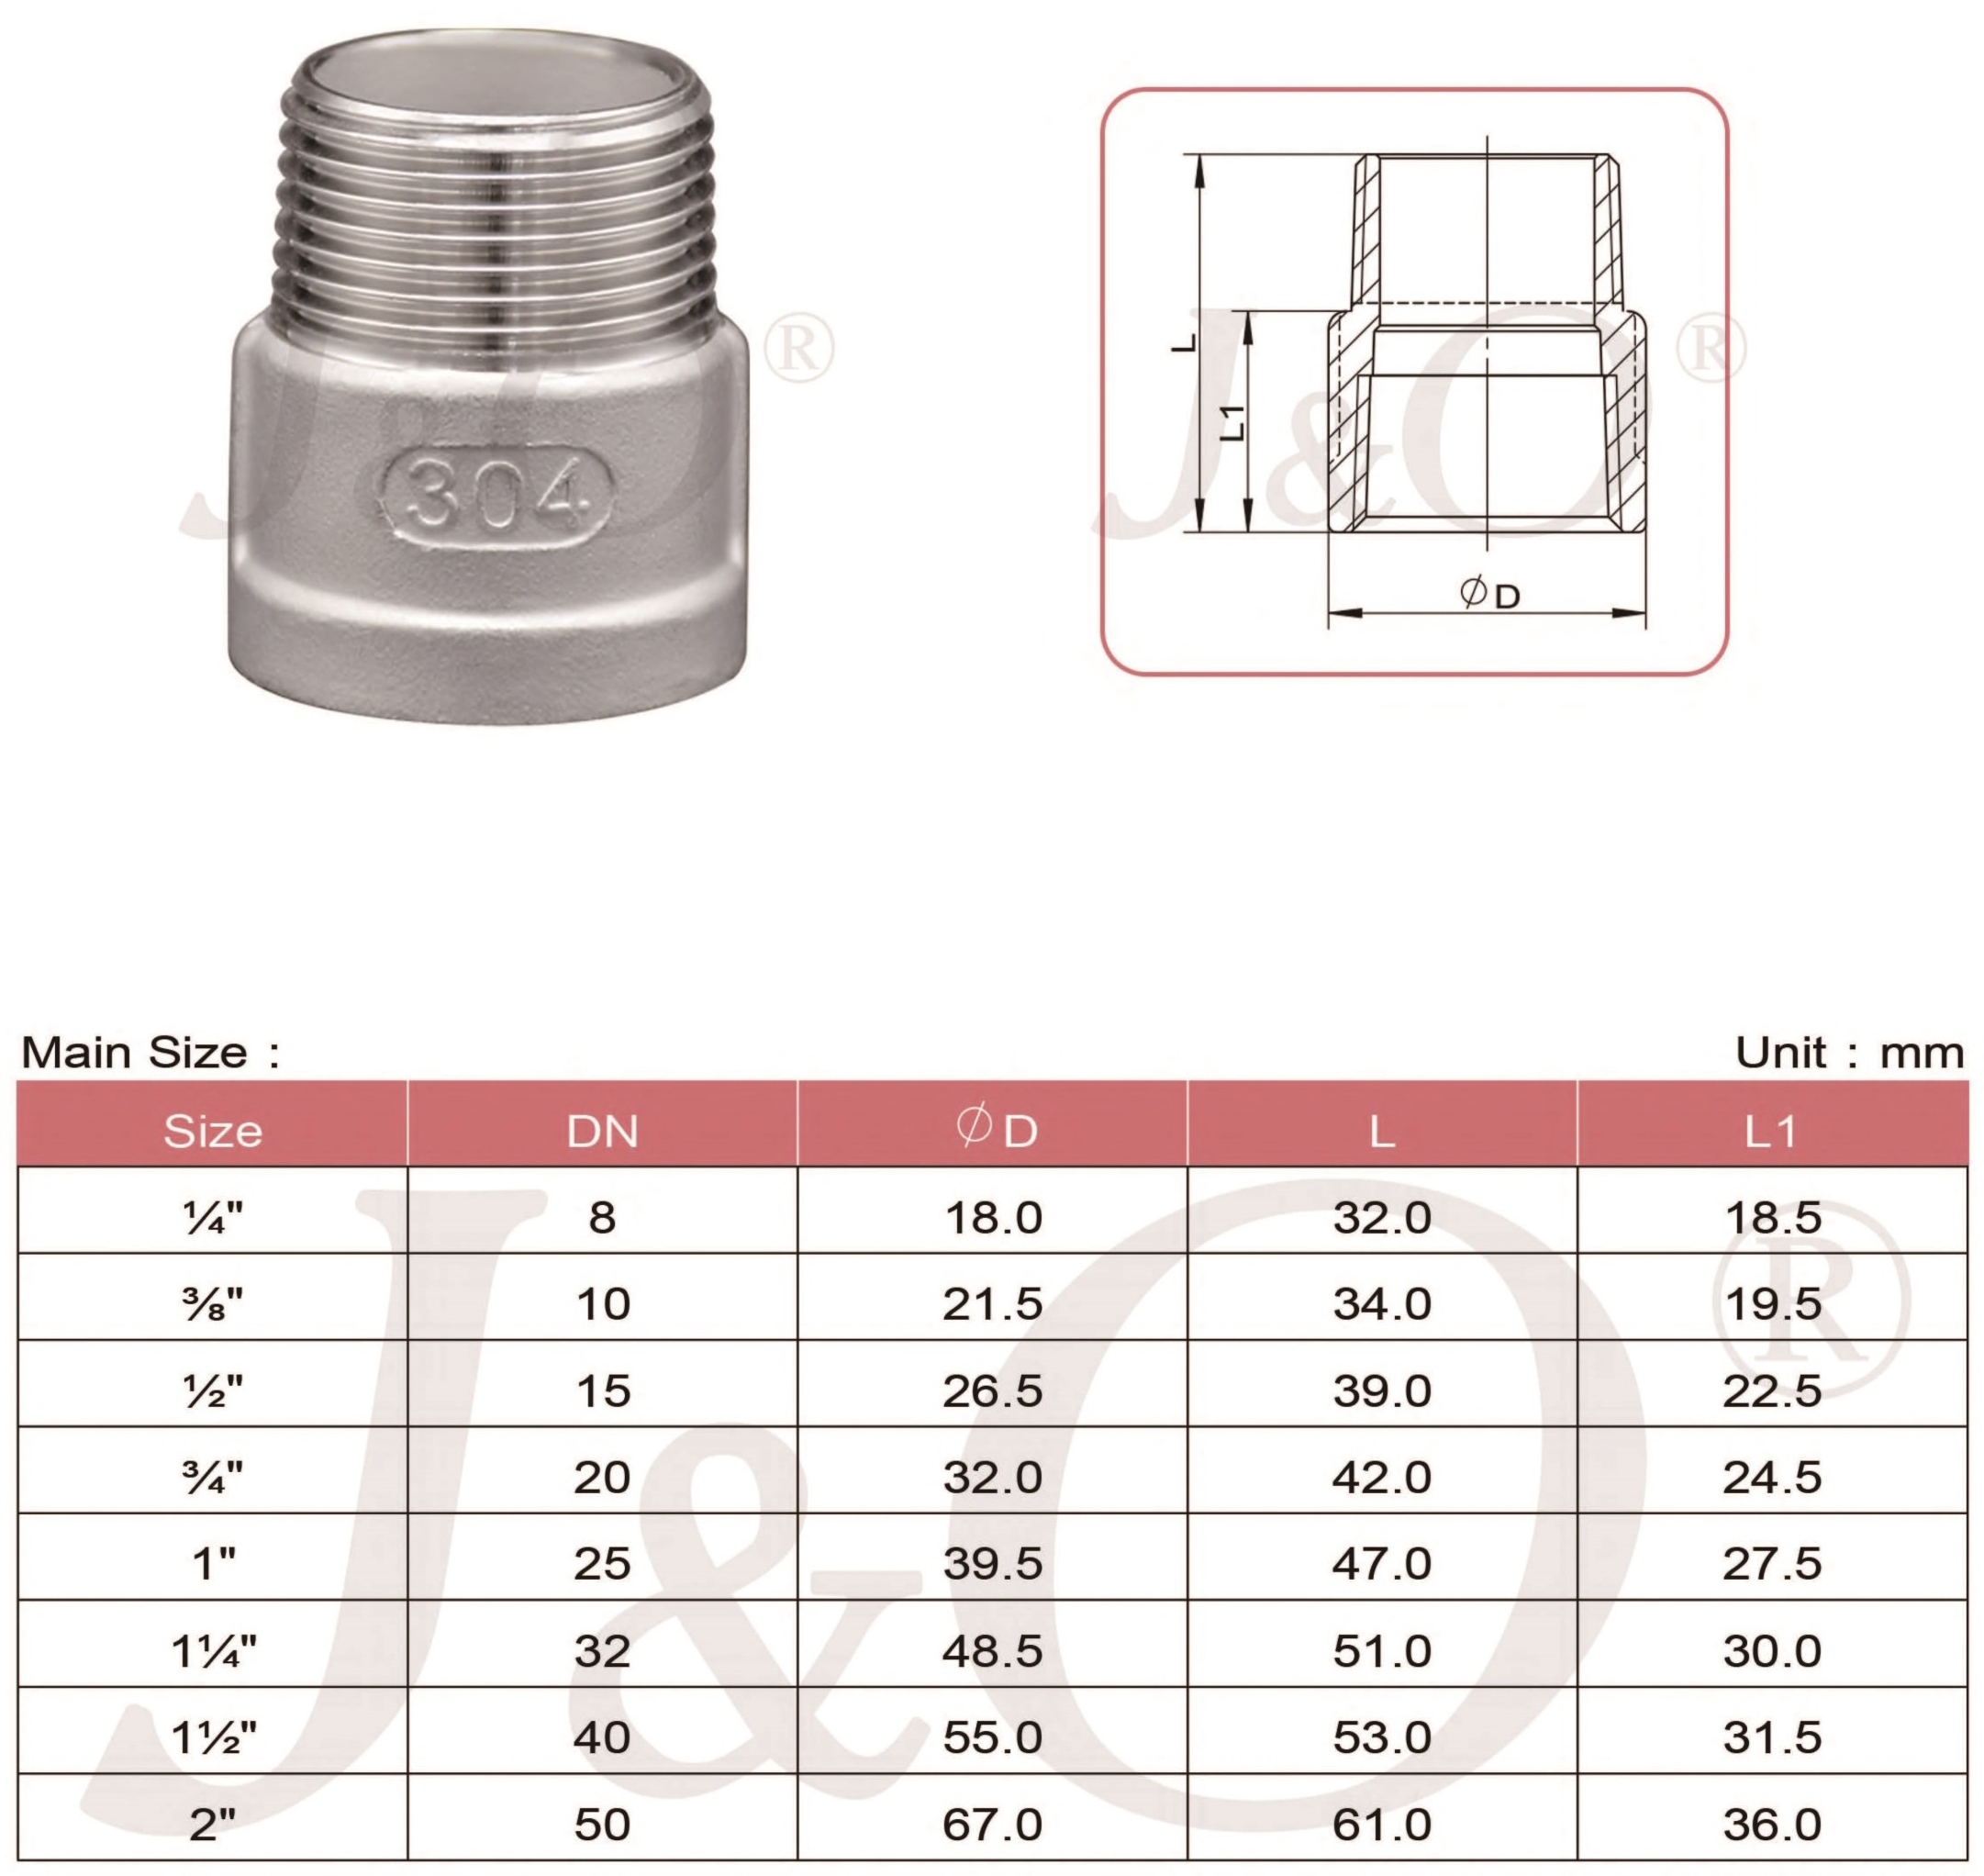 150LBS Stainless Steel Female-Male Round Adapter